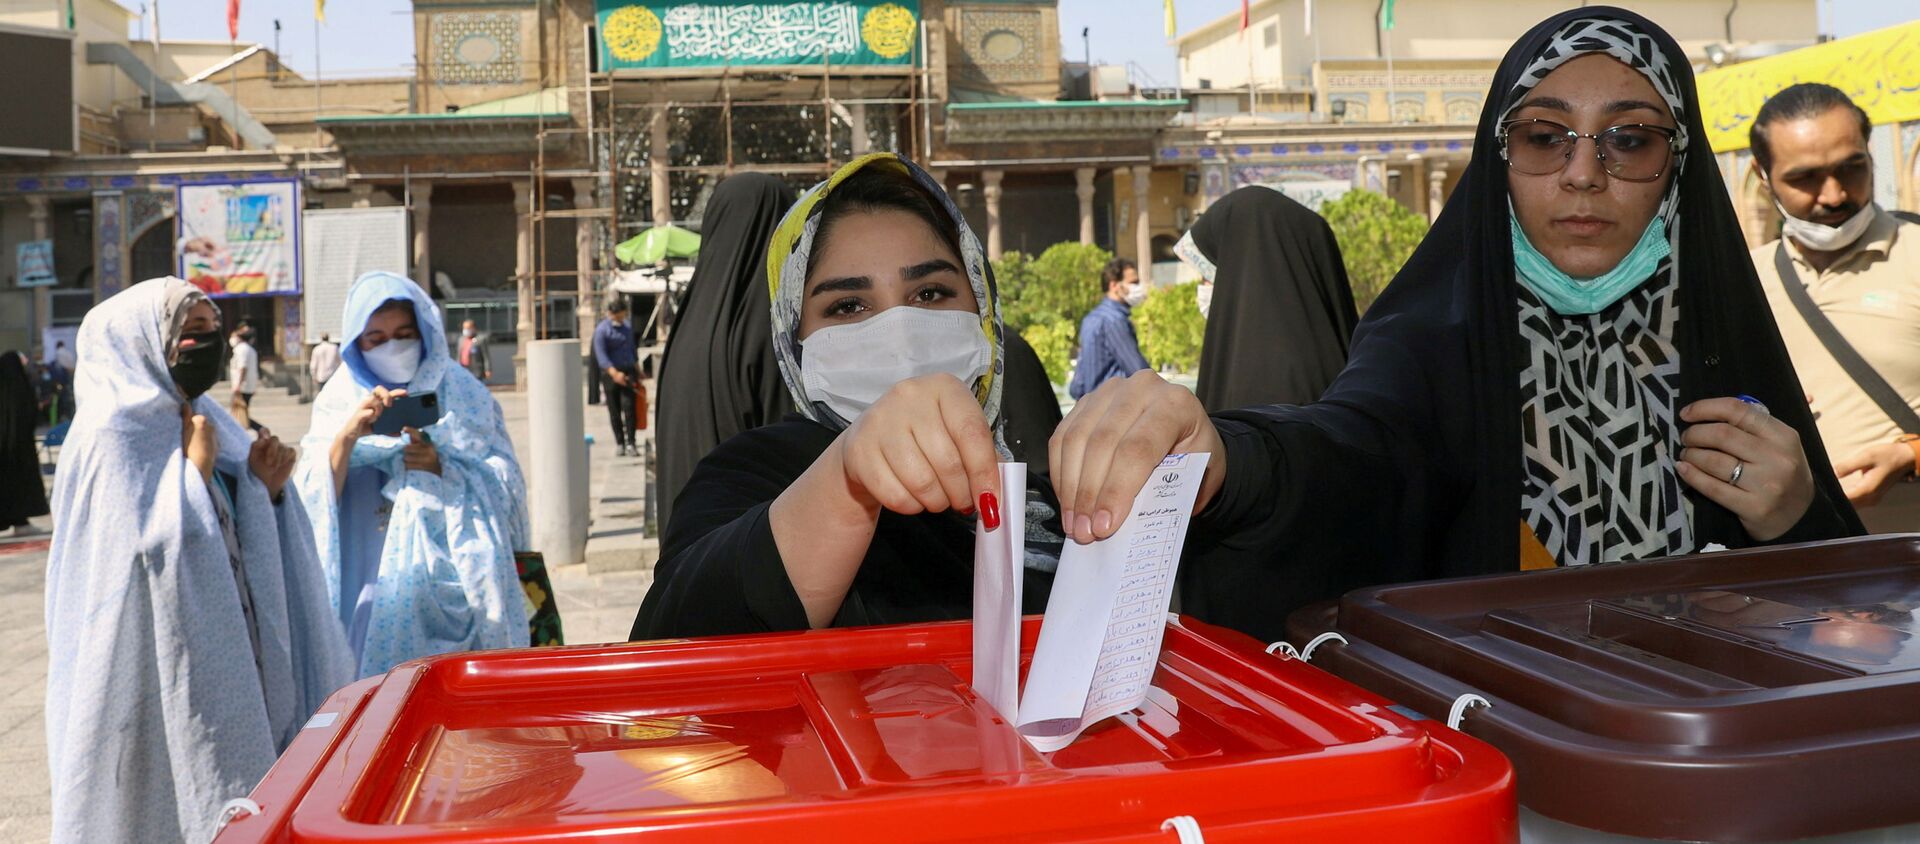 Iranian women cast their vote during presidential elections at a polling station in Tehran, Iran June 18, 2021 - Sputnik International, 1920